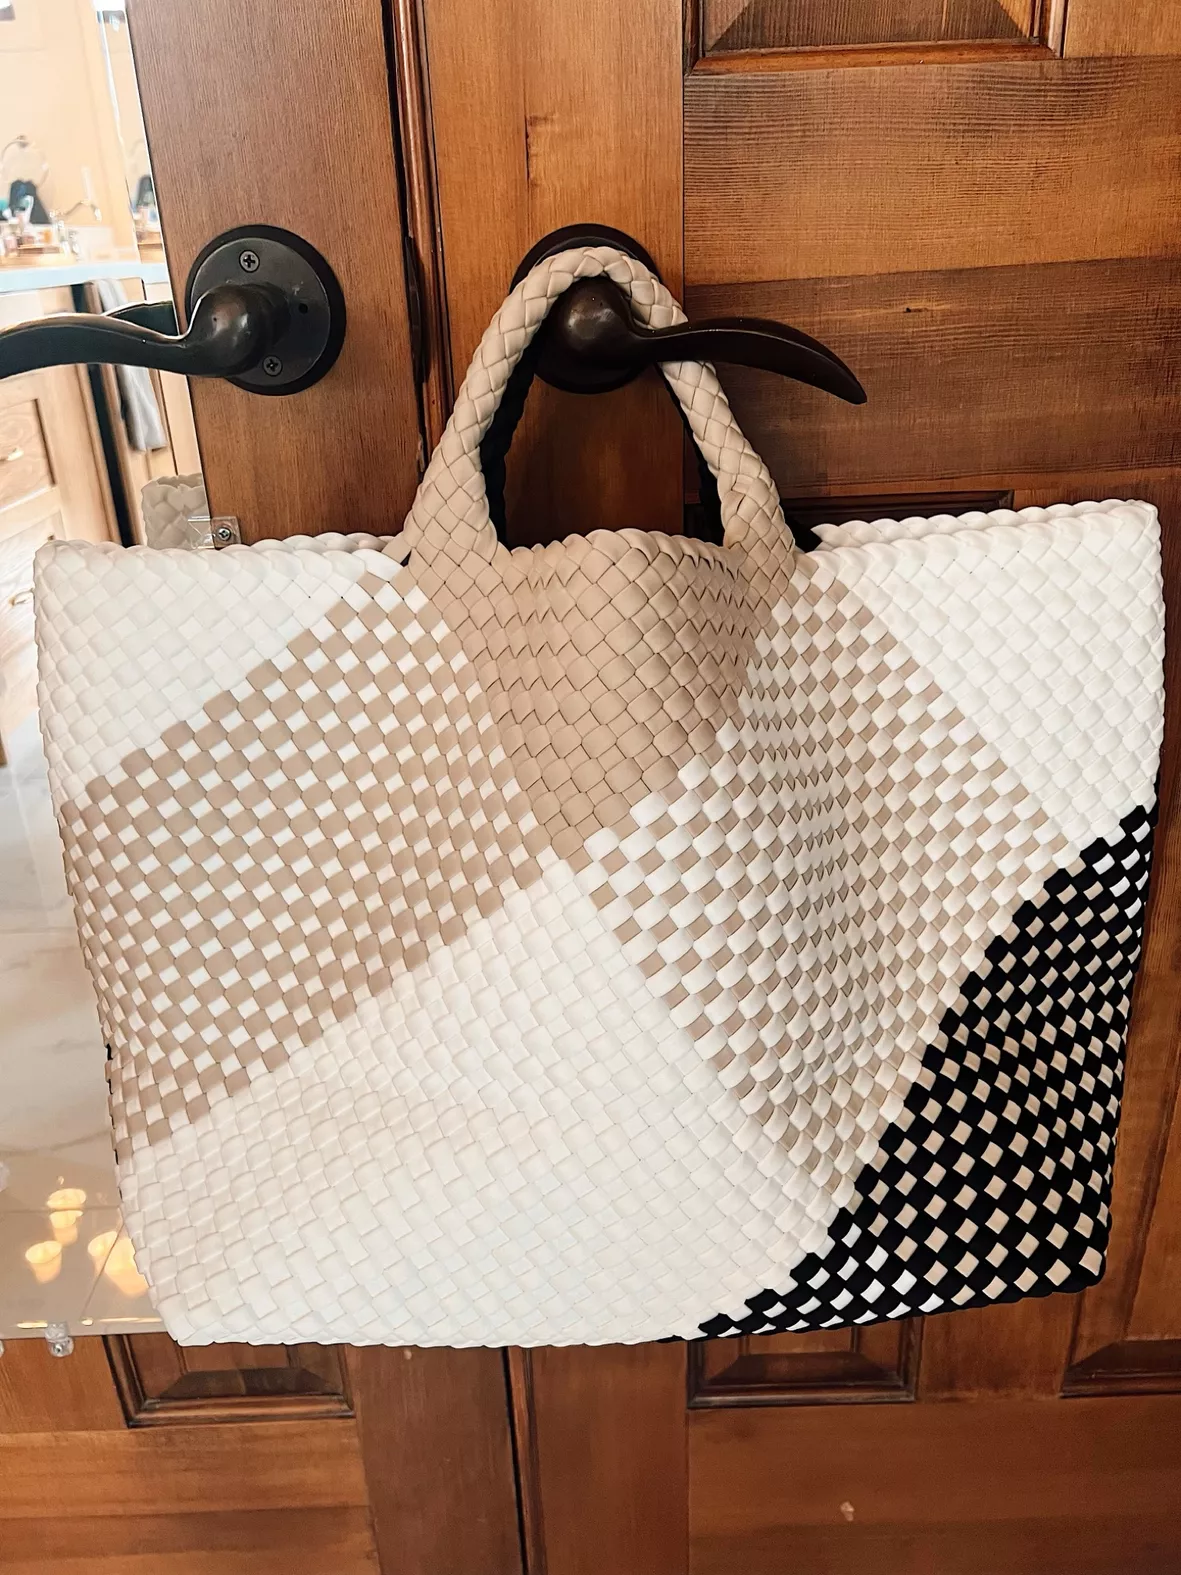 Naghedi St Barths Large Tote curated on LTK